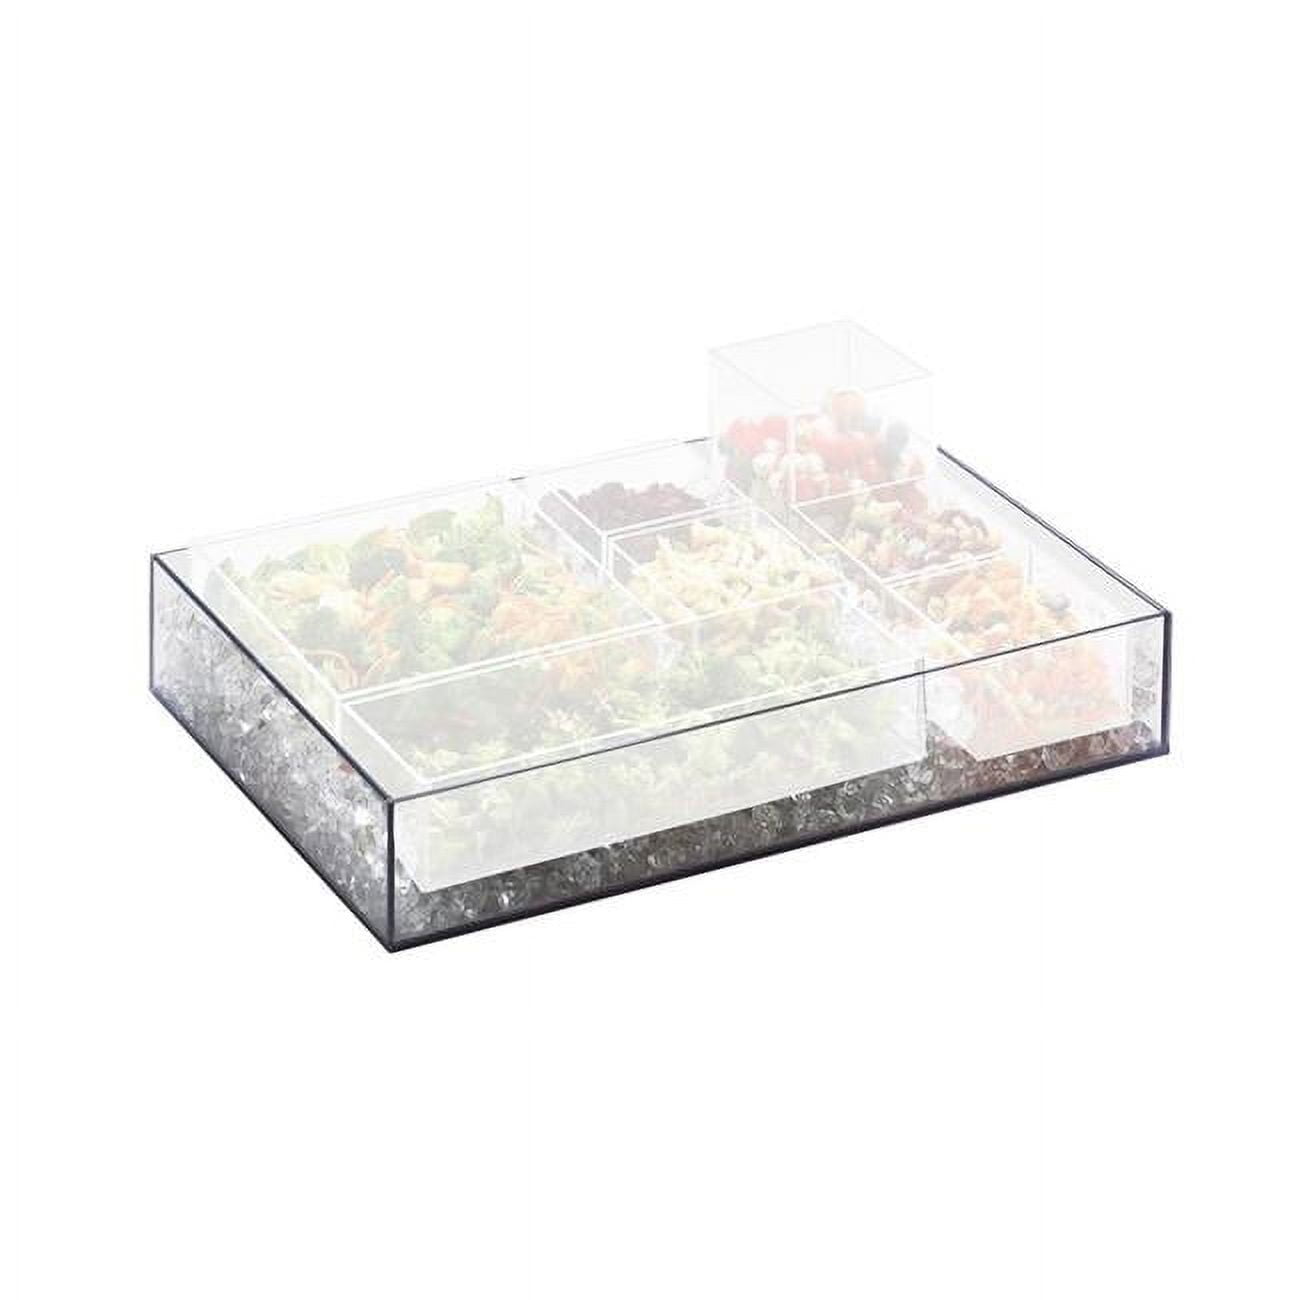 Picture of Cal Mil 1393-12 Cater Choice Clear Acrylic Square Accessory Bowl - 10 x 10 x 3 in.